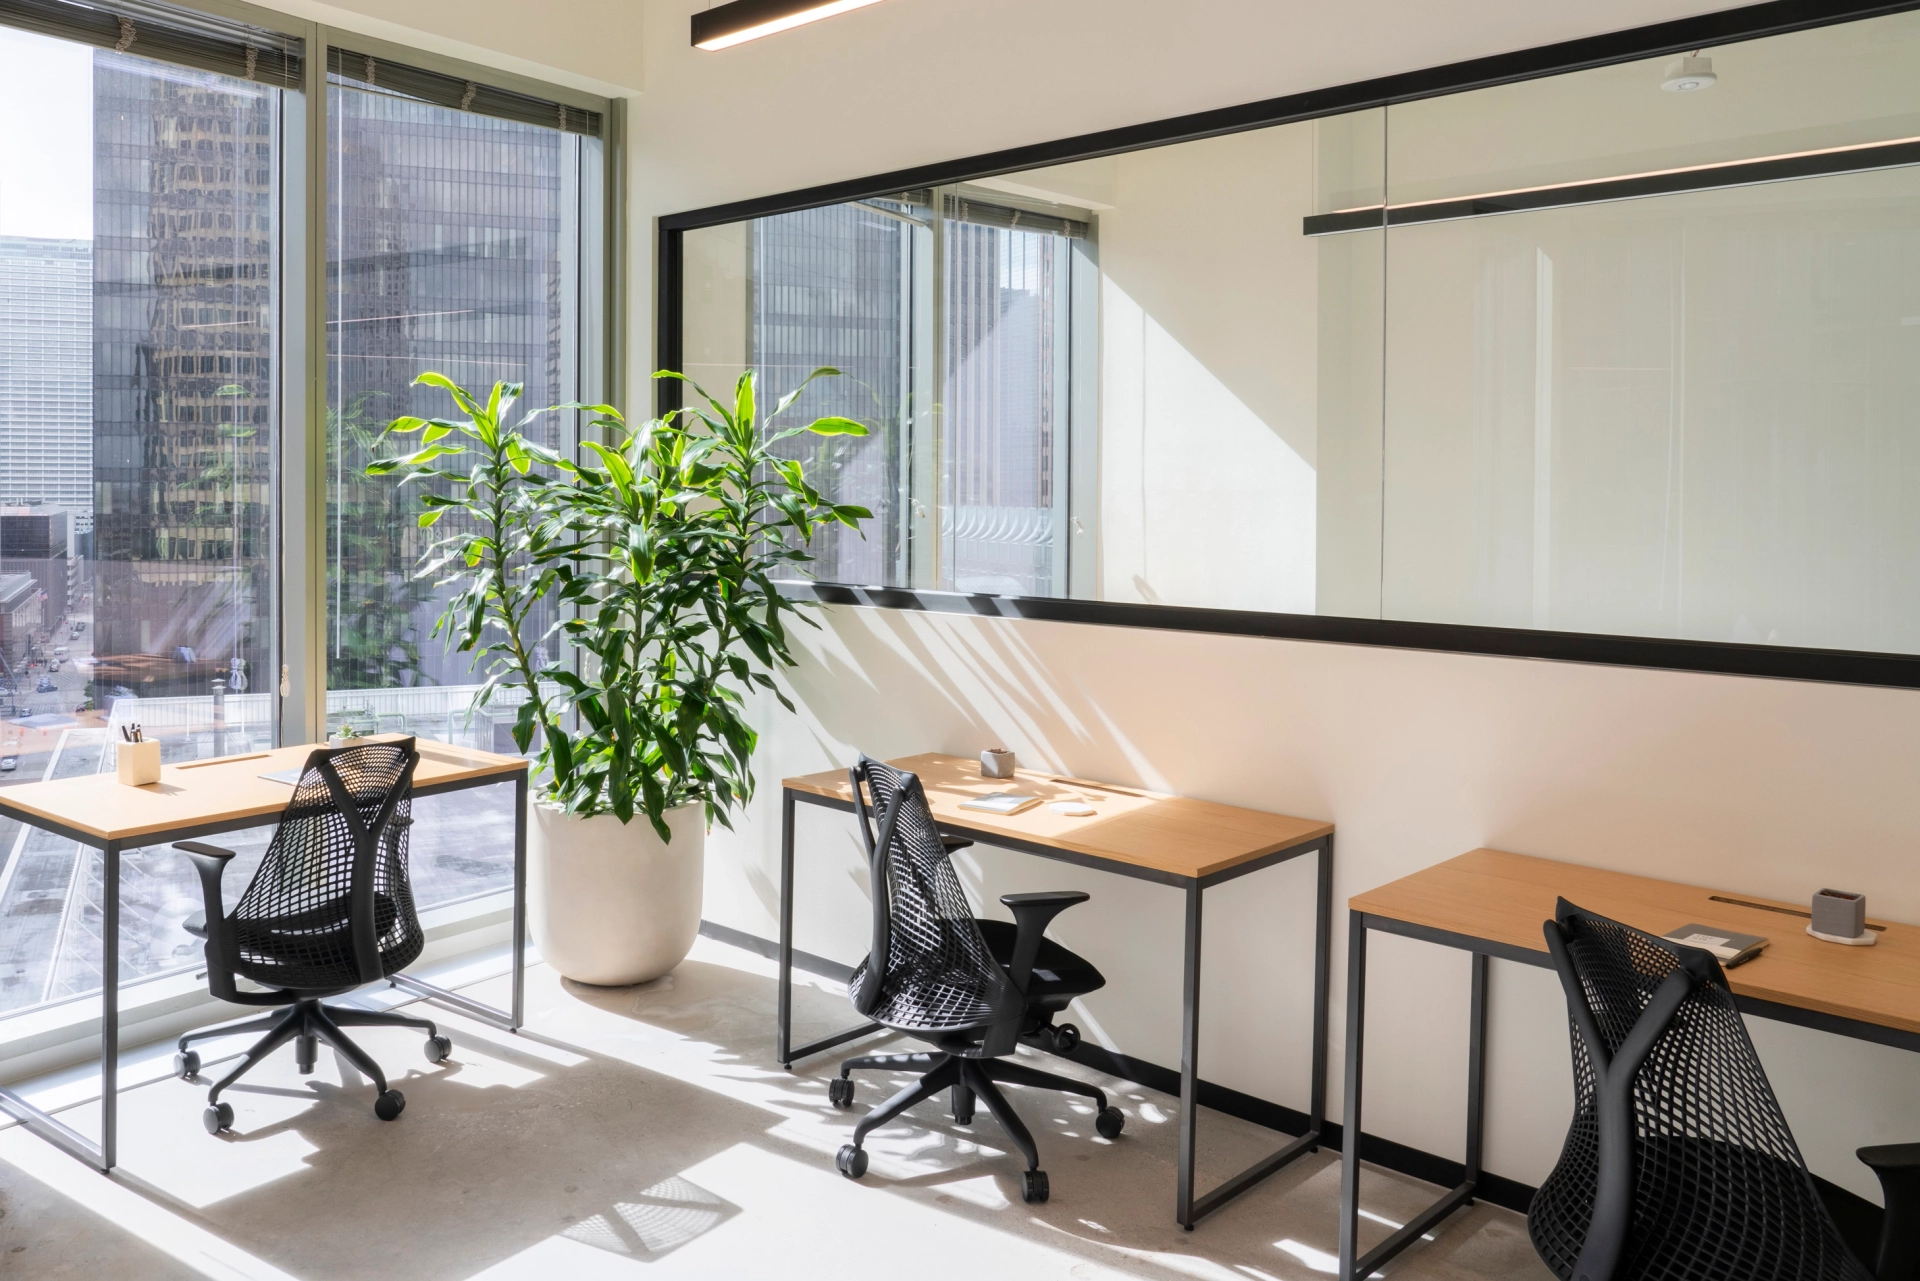 A coworking meeting room in Fort Lauderdale equipped with two desks, chairs, and a plant.